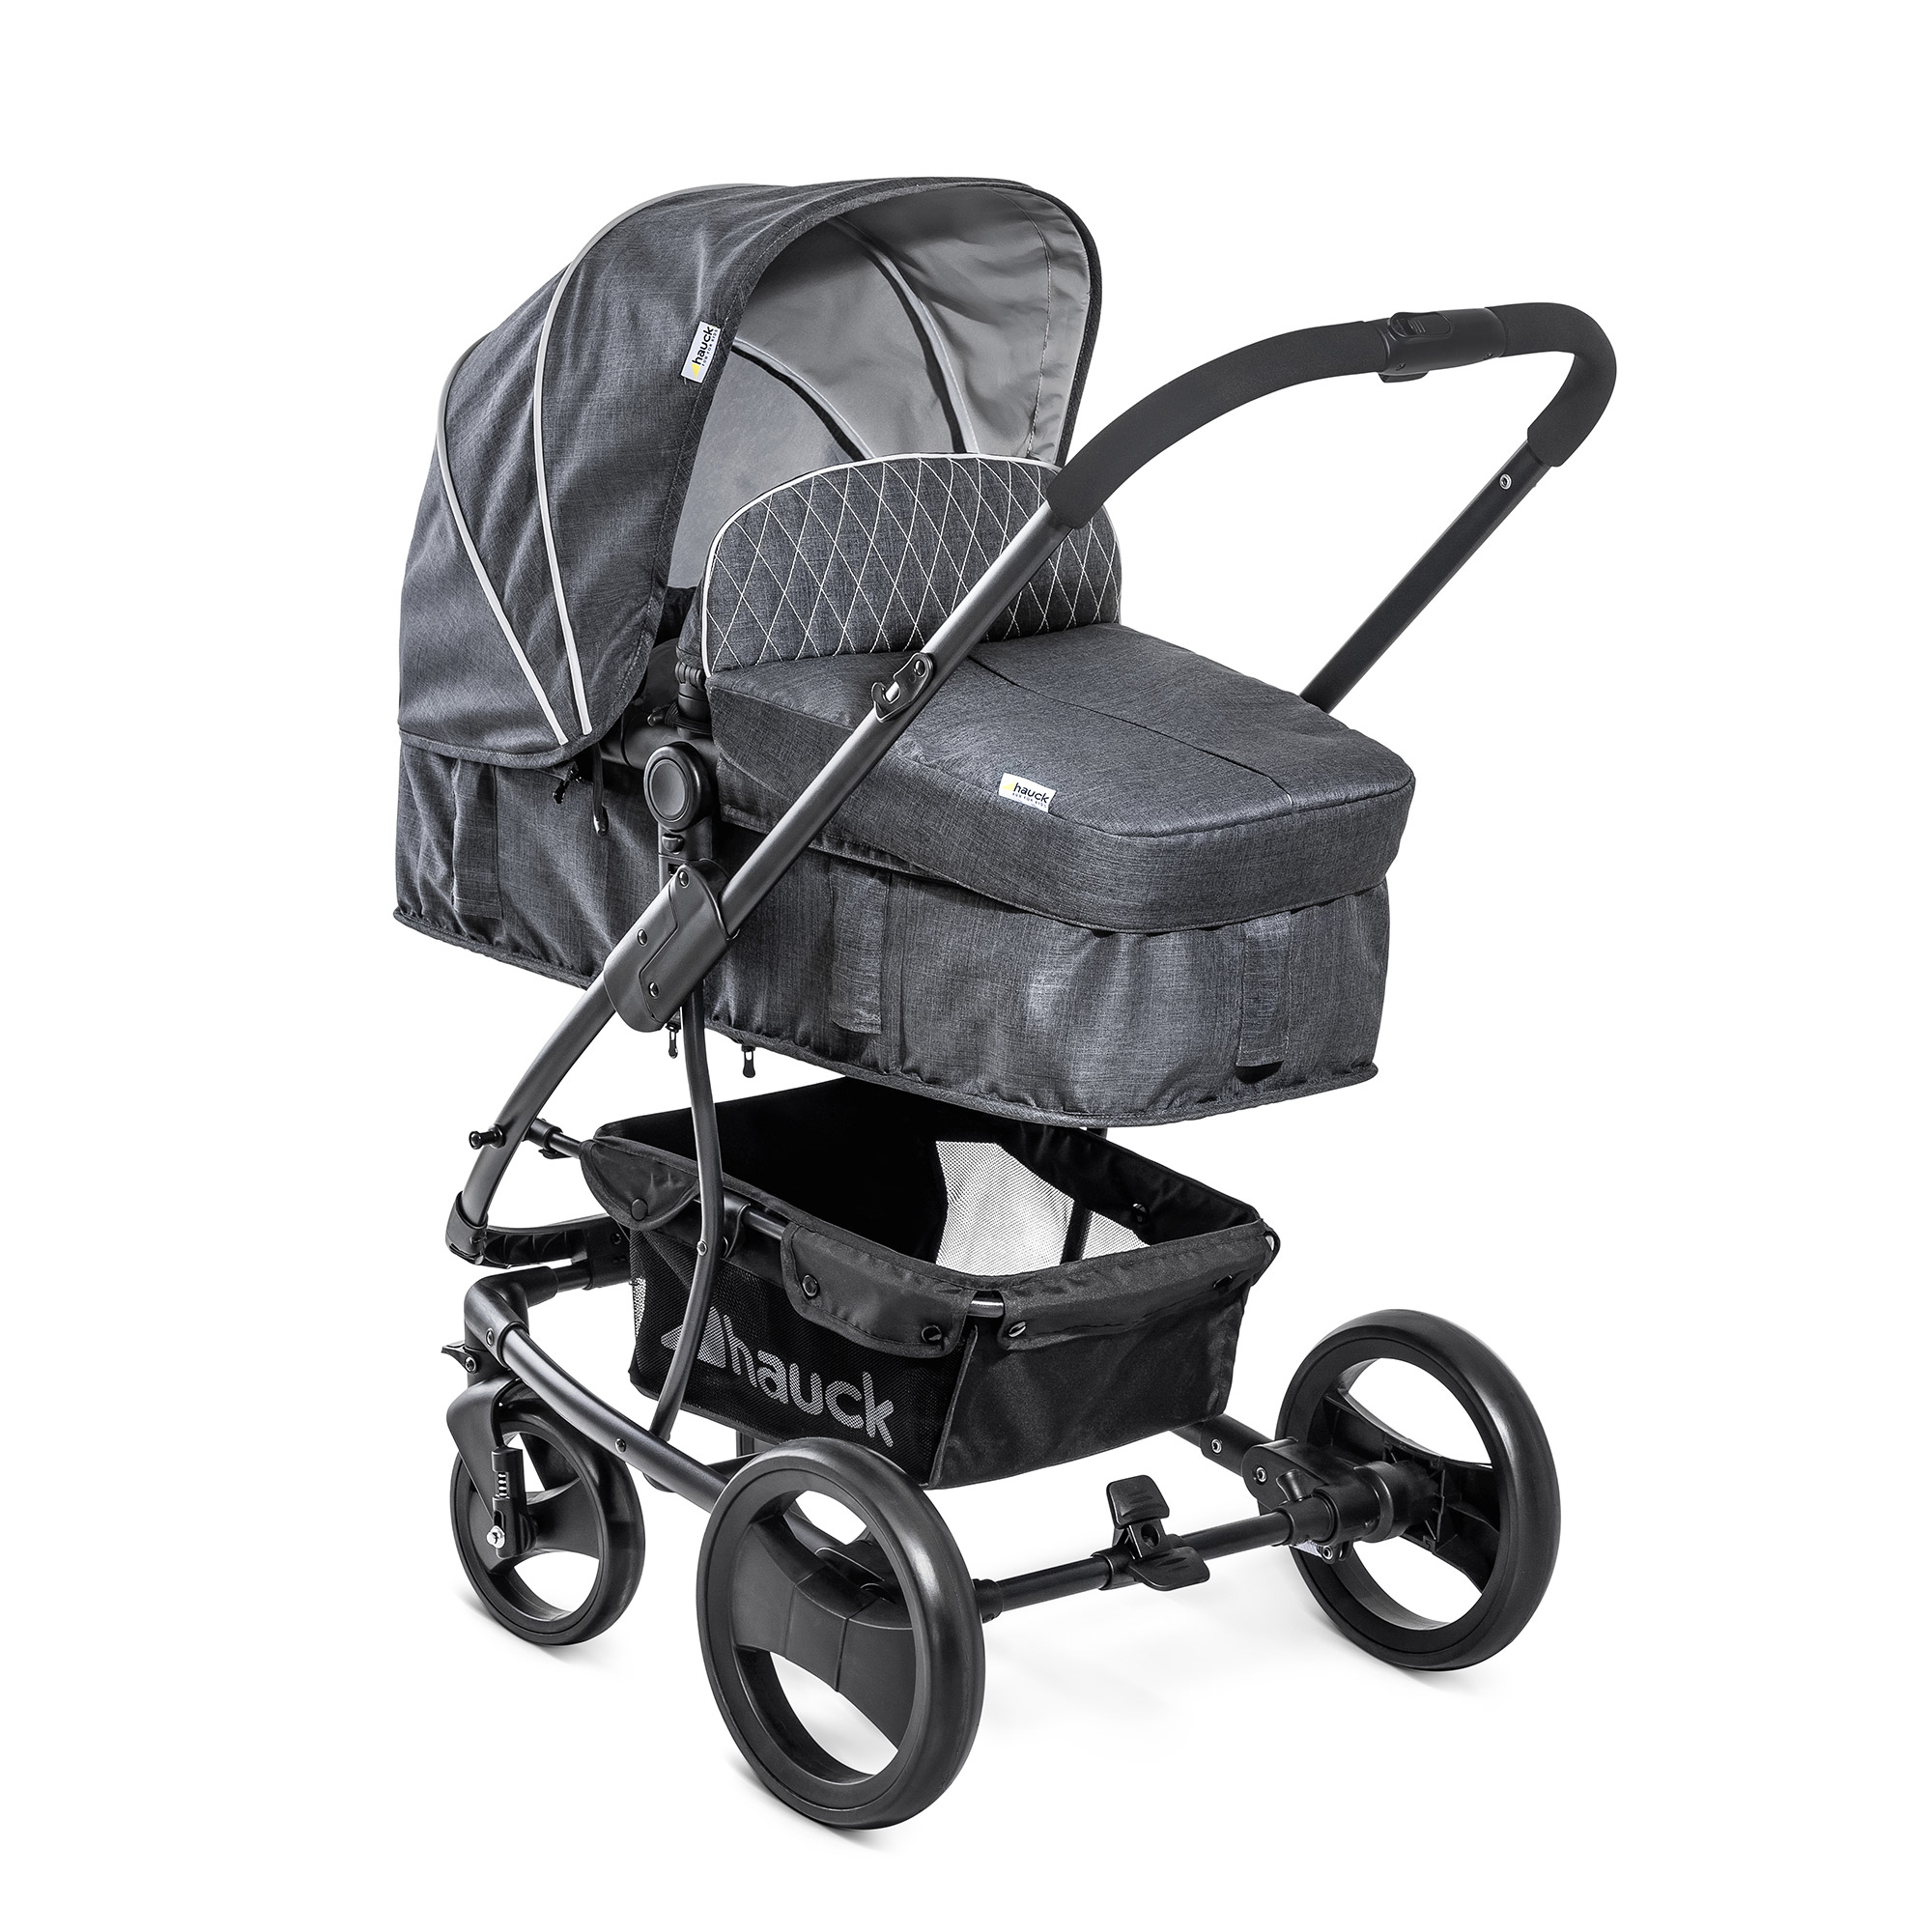 hauck shop n drive travel system